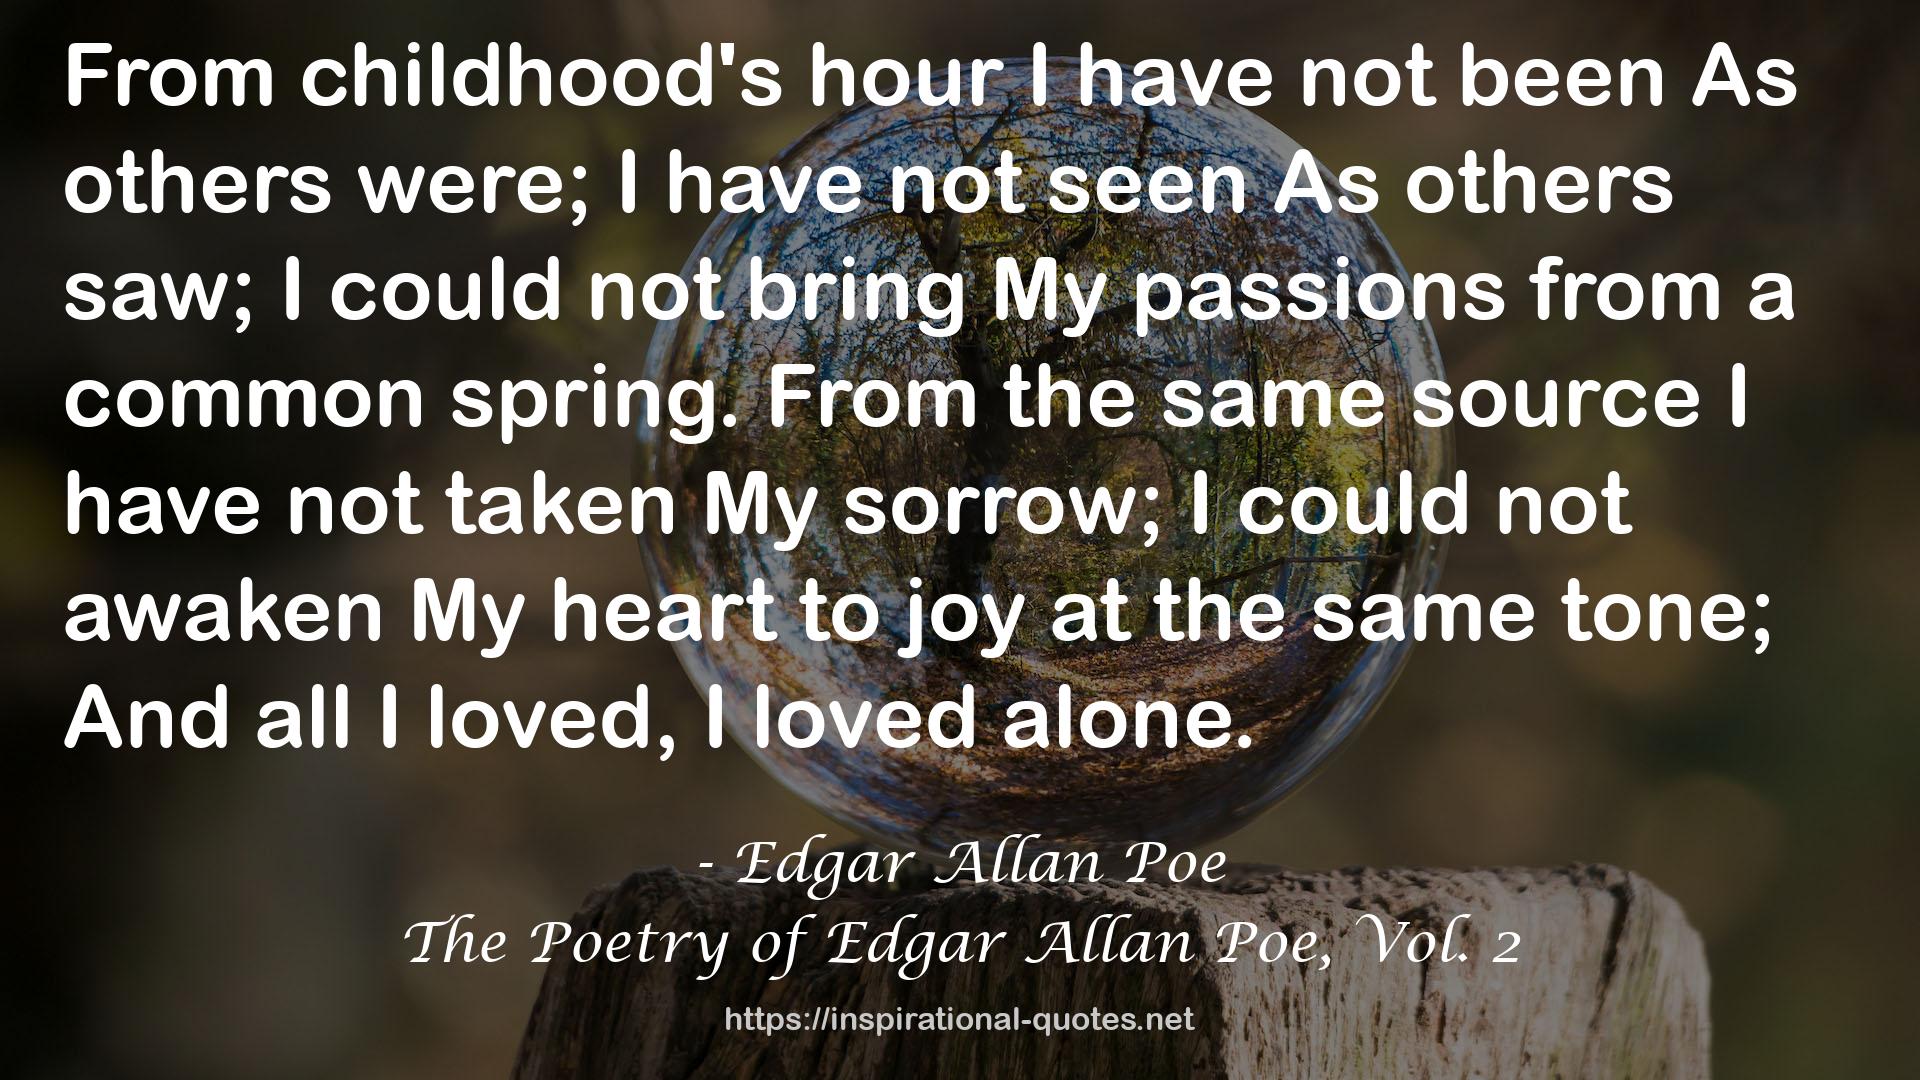 The Poetry of Edgar Allan Poe, Vol. 2 QUOTES